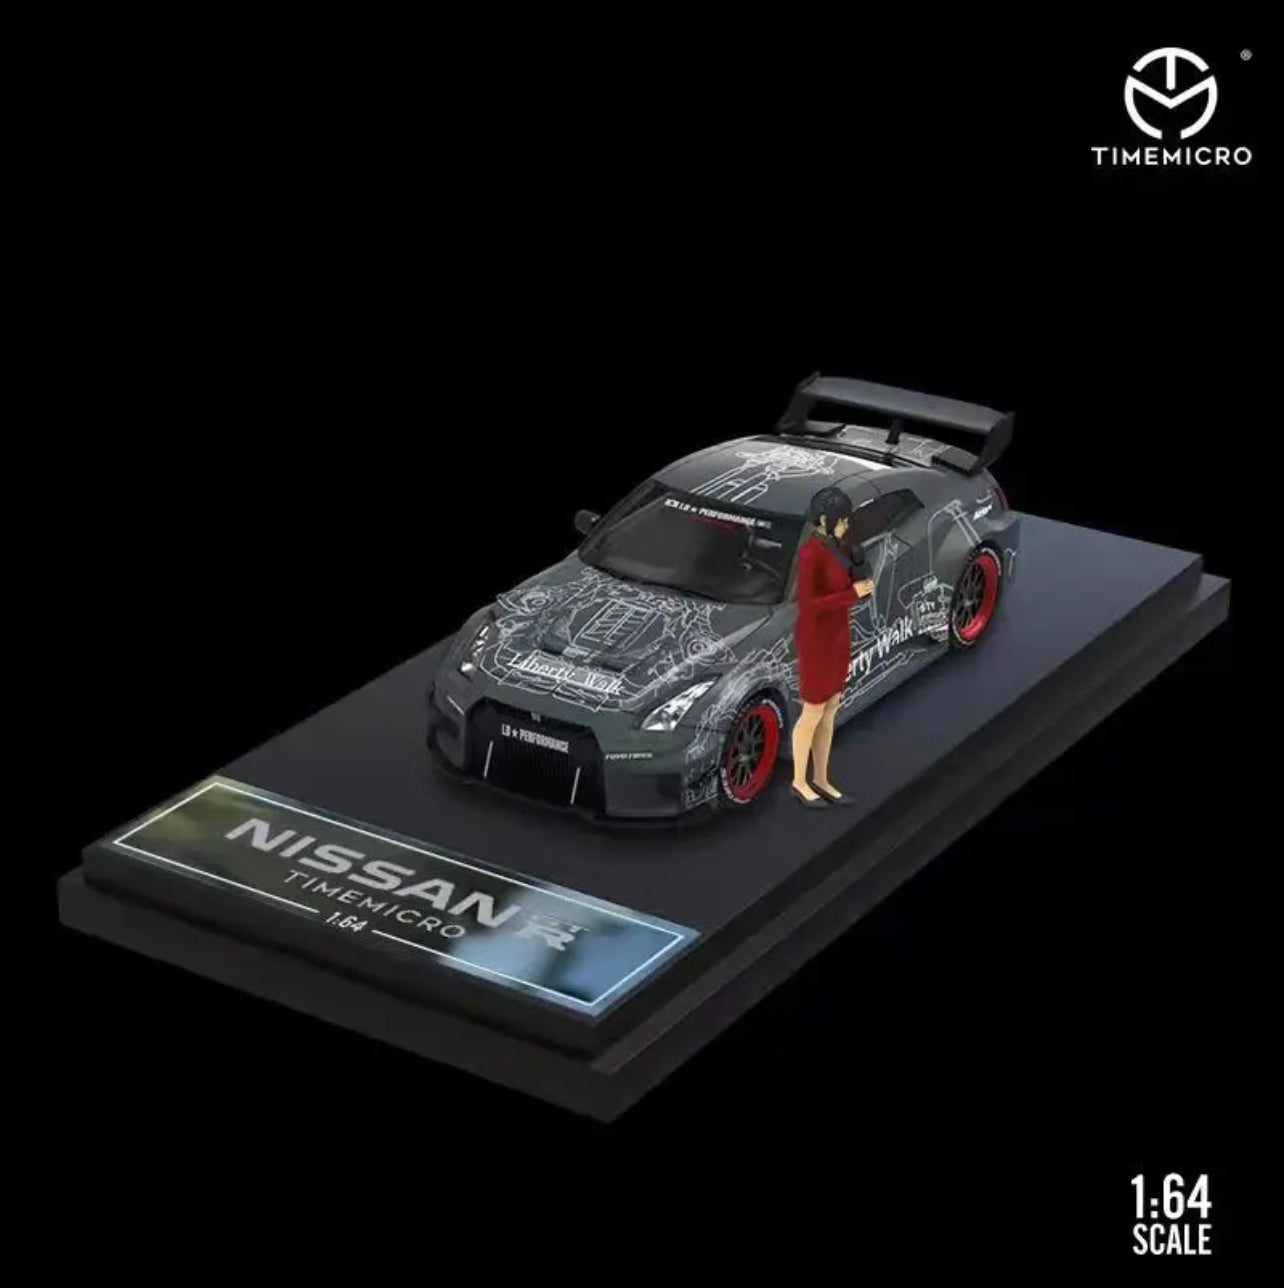 Time Micro 1:64 LBWK Nissan GTR R35 LB 3.0 With Figure